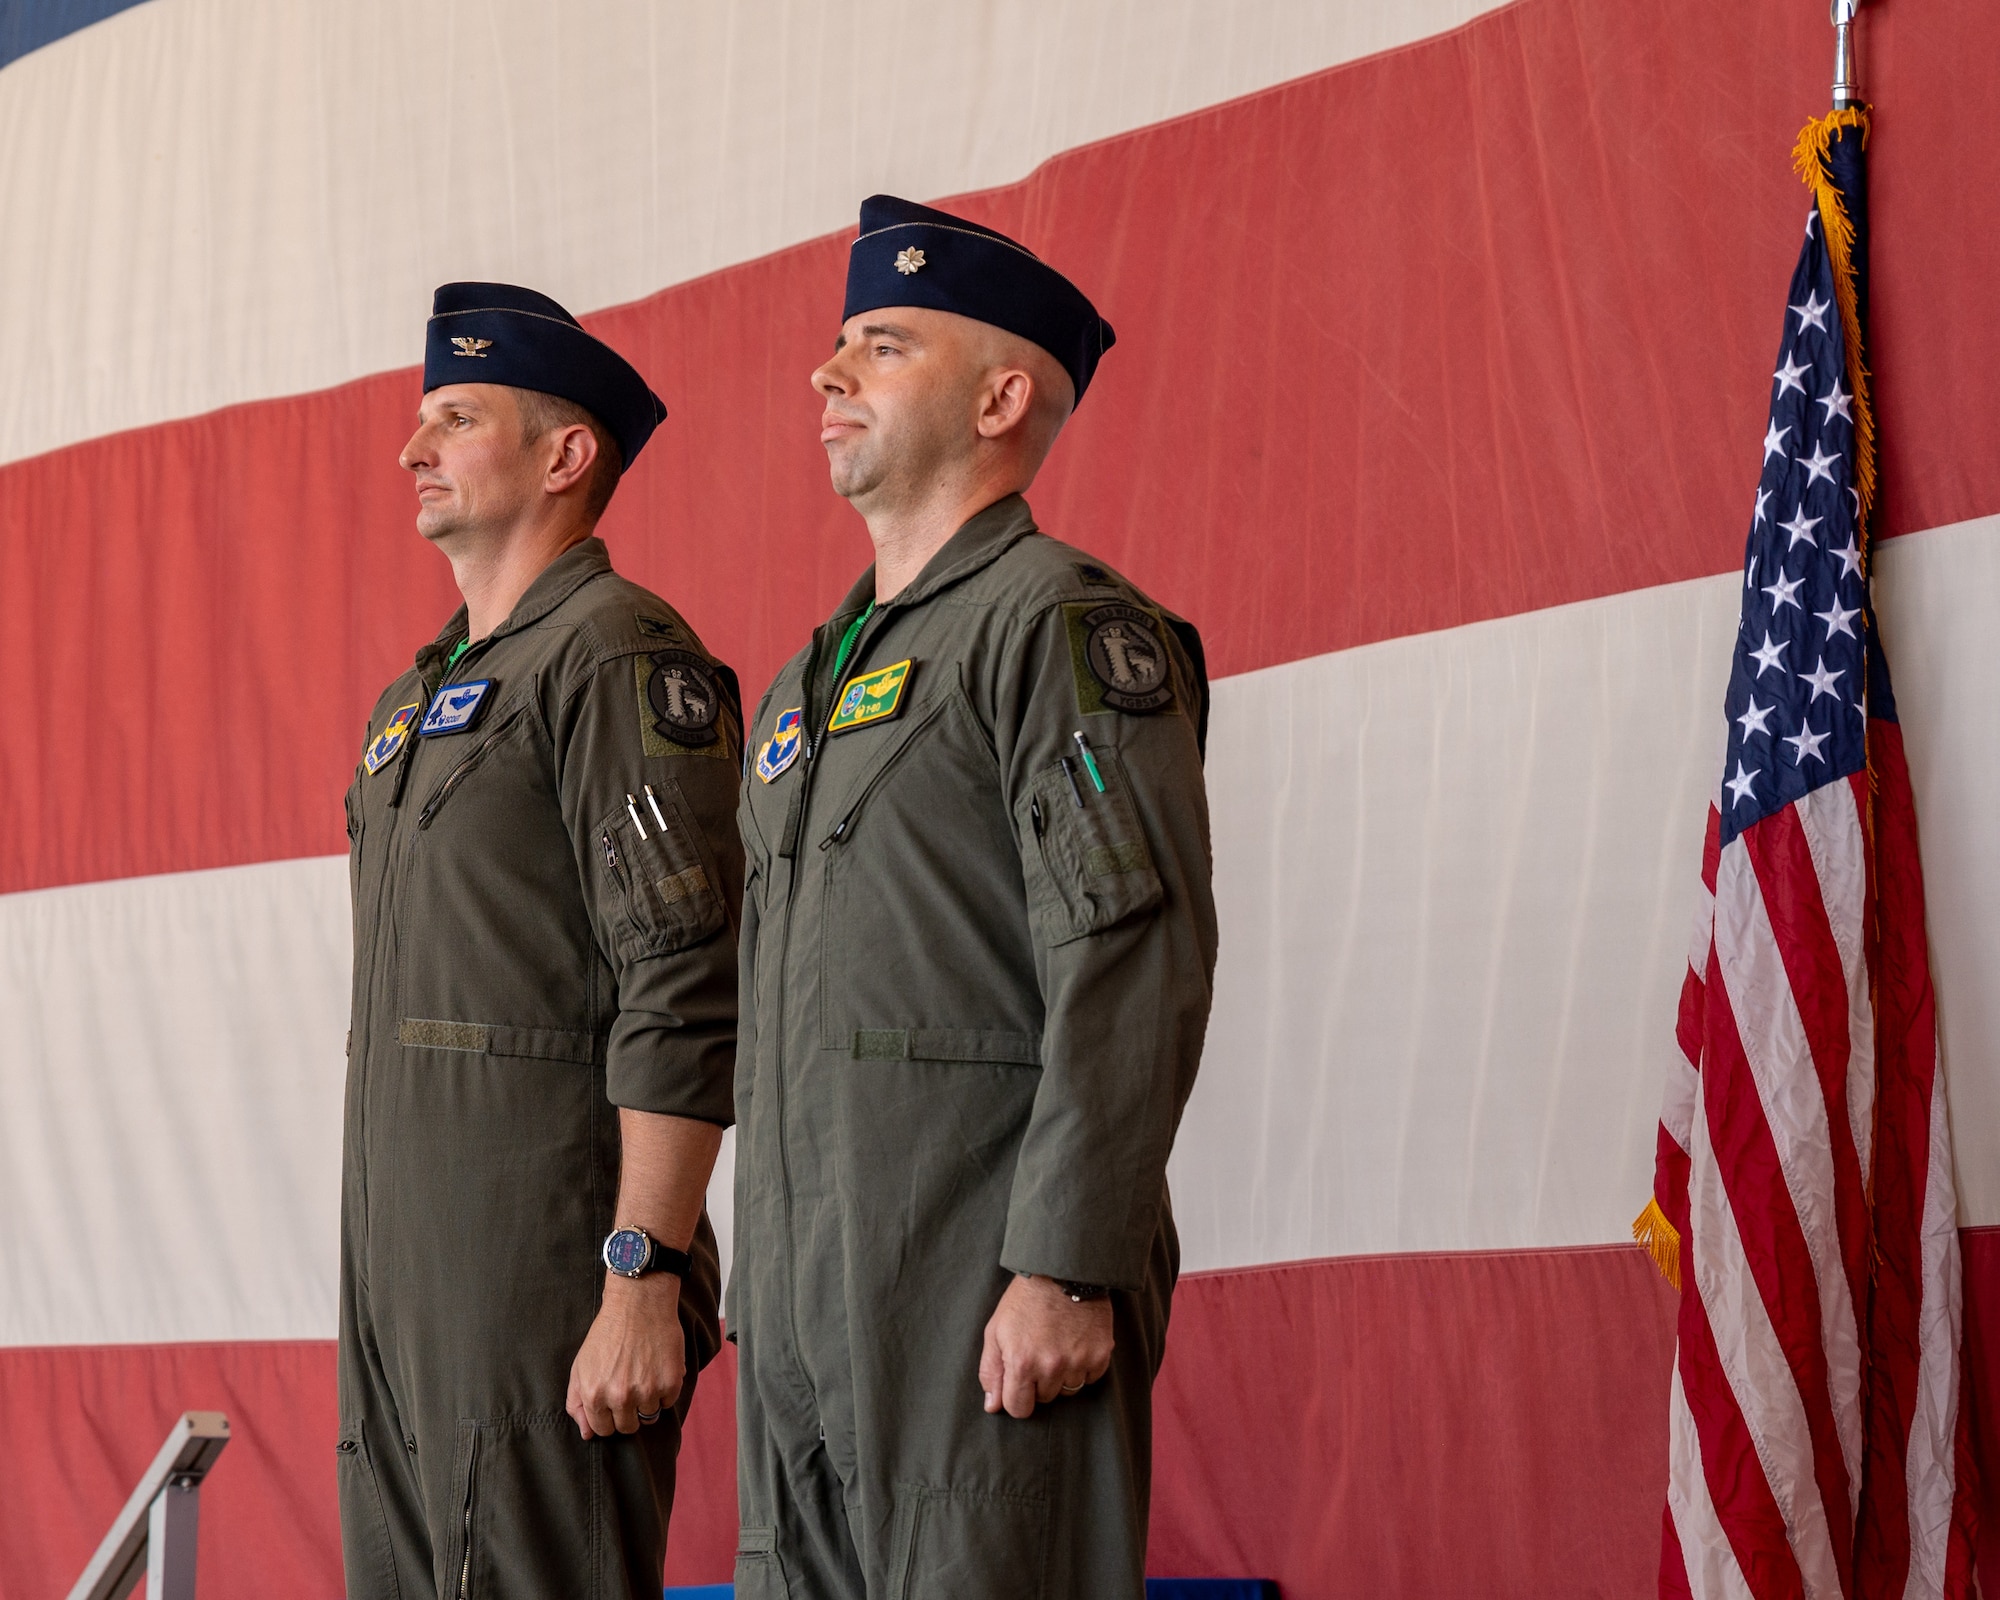 U.S. Air Force Col. Matthew Johnston (left), 56th Operations Group commander, stands by U.S. Air Force Lt. Col. Adam Vogel (right), 310th Fighter Squadron commander, at an assumption of command ceremony June 2, 2023, at Luke Air Force Base, Arizona.